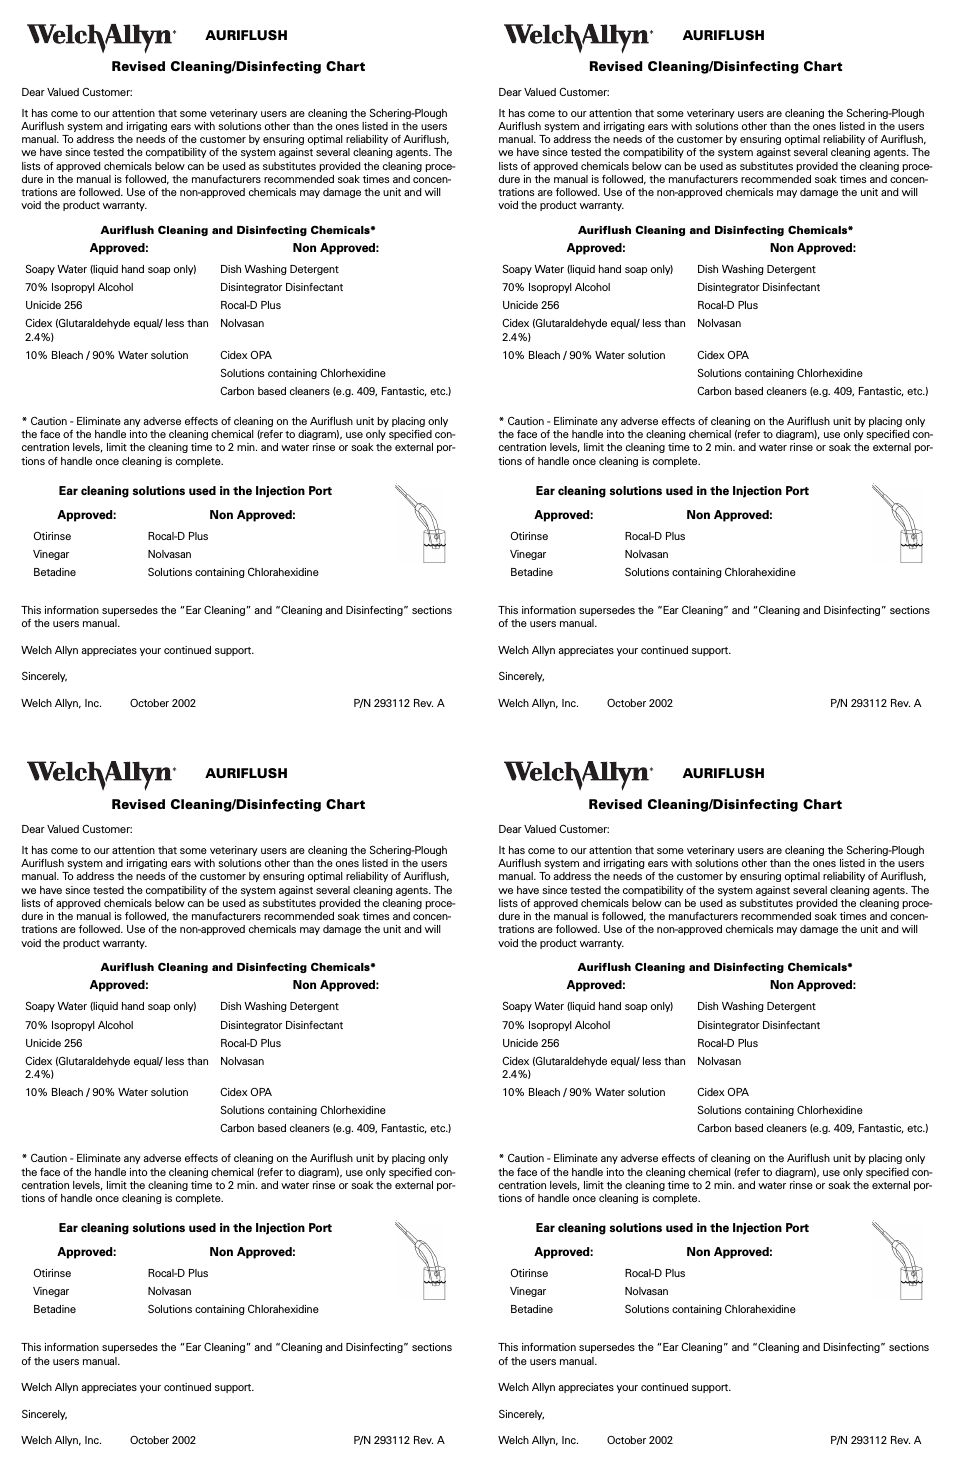 AURIFLUSH Revised Cleaning/Disinfecting Chart - User Manual